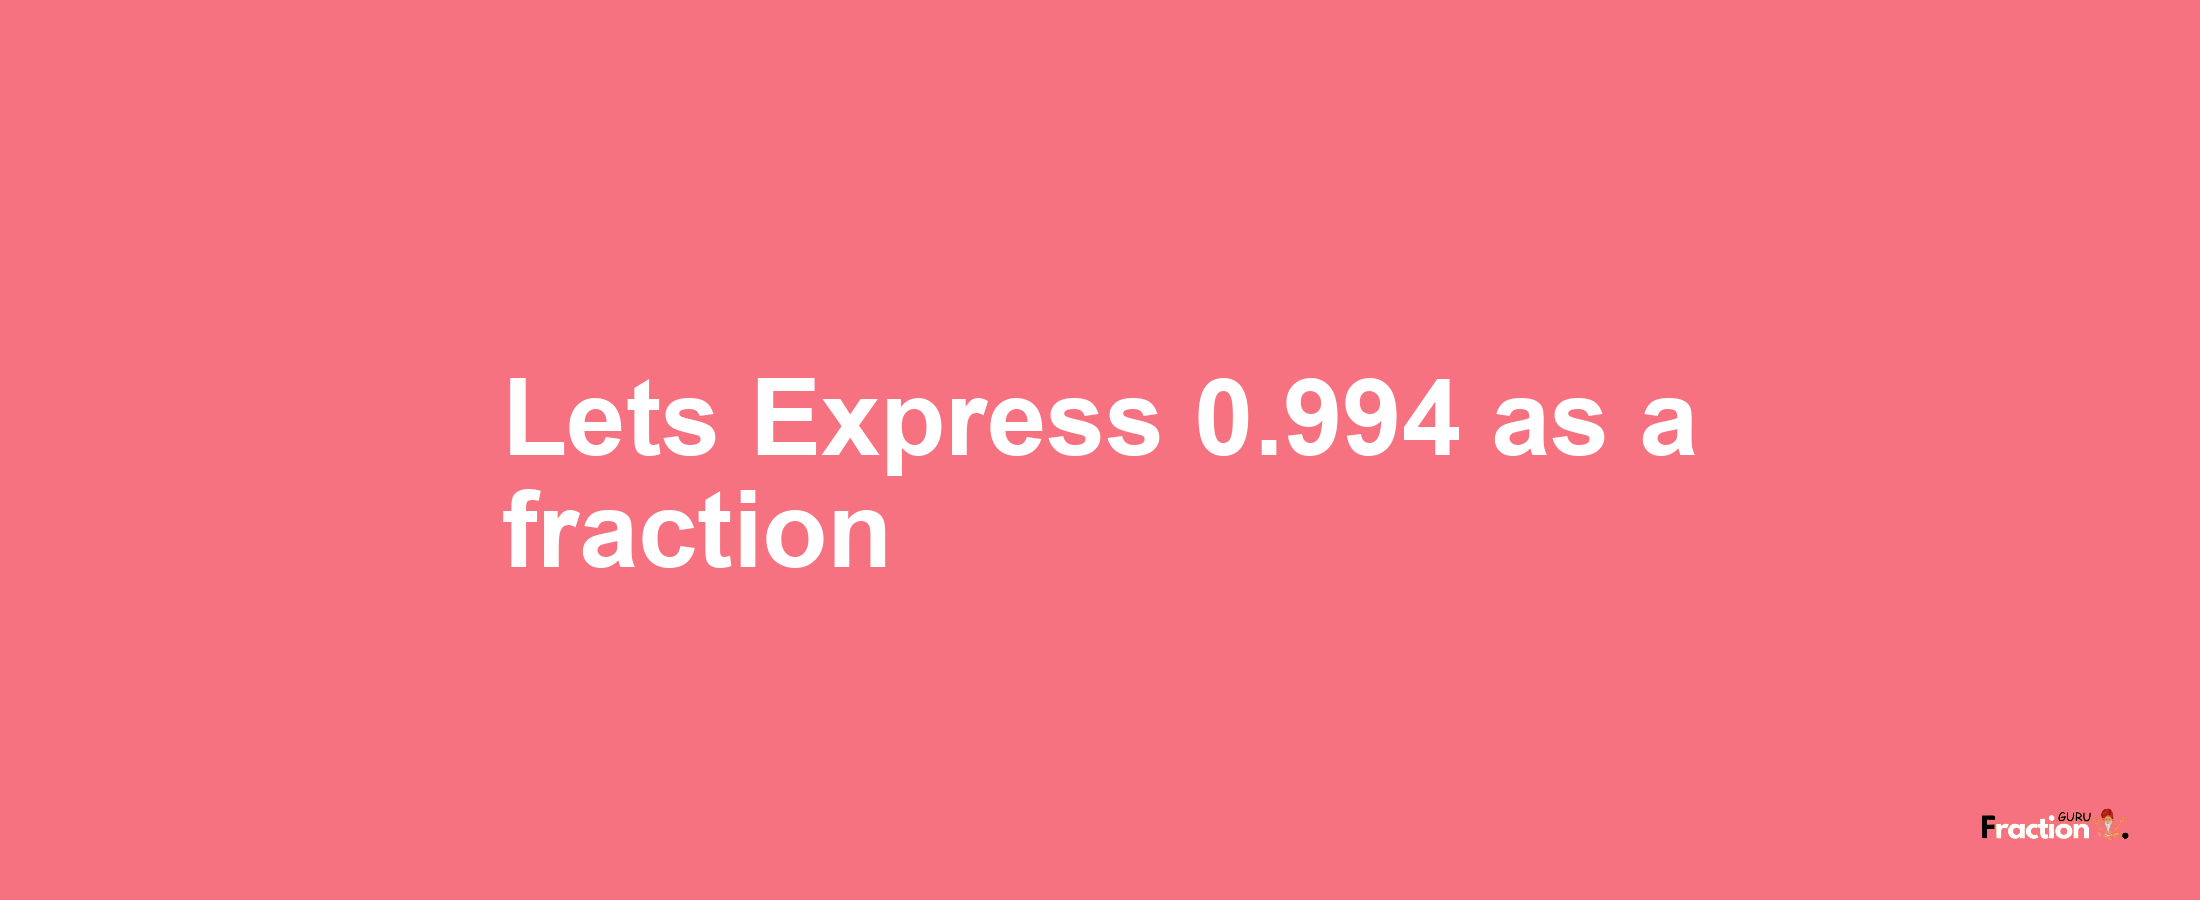 Lets Express 0.994 as afraction